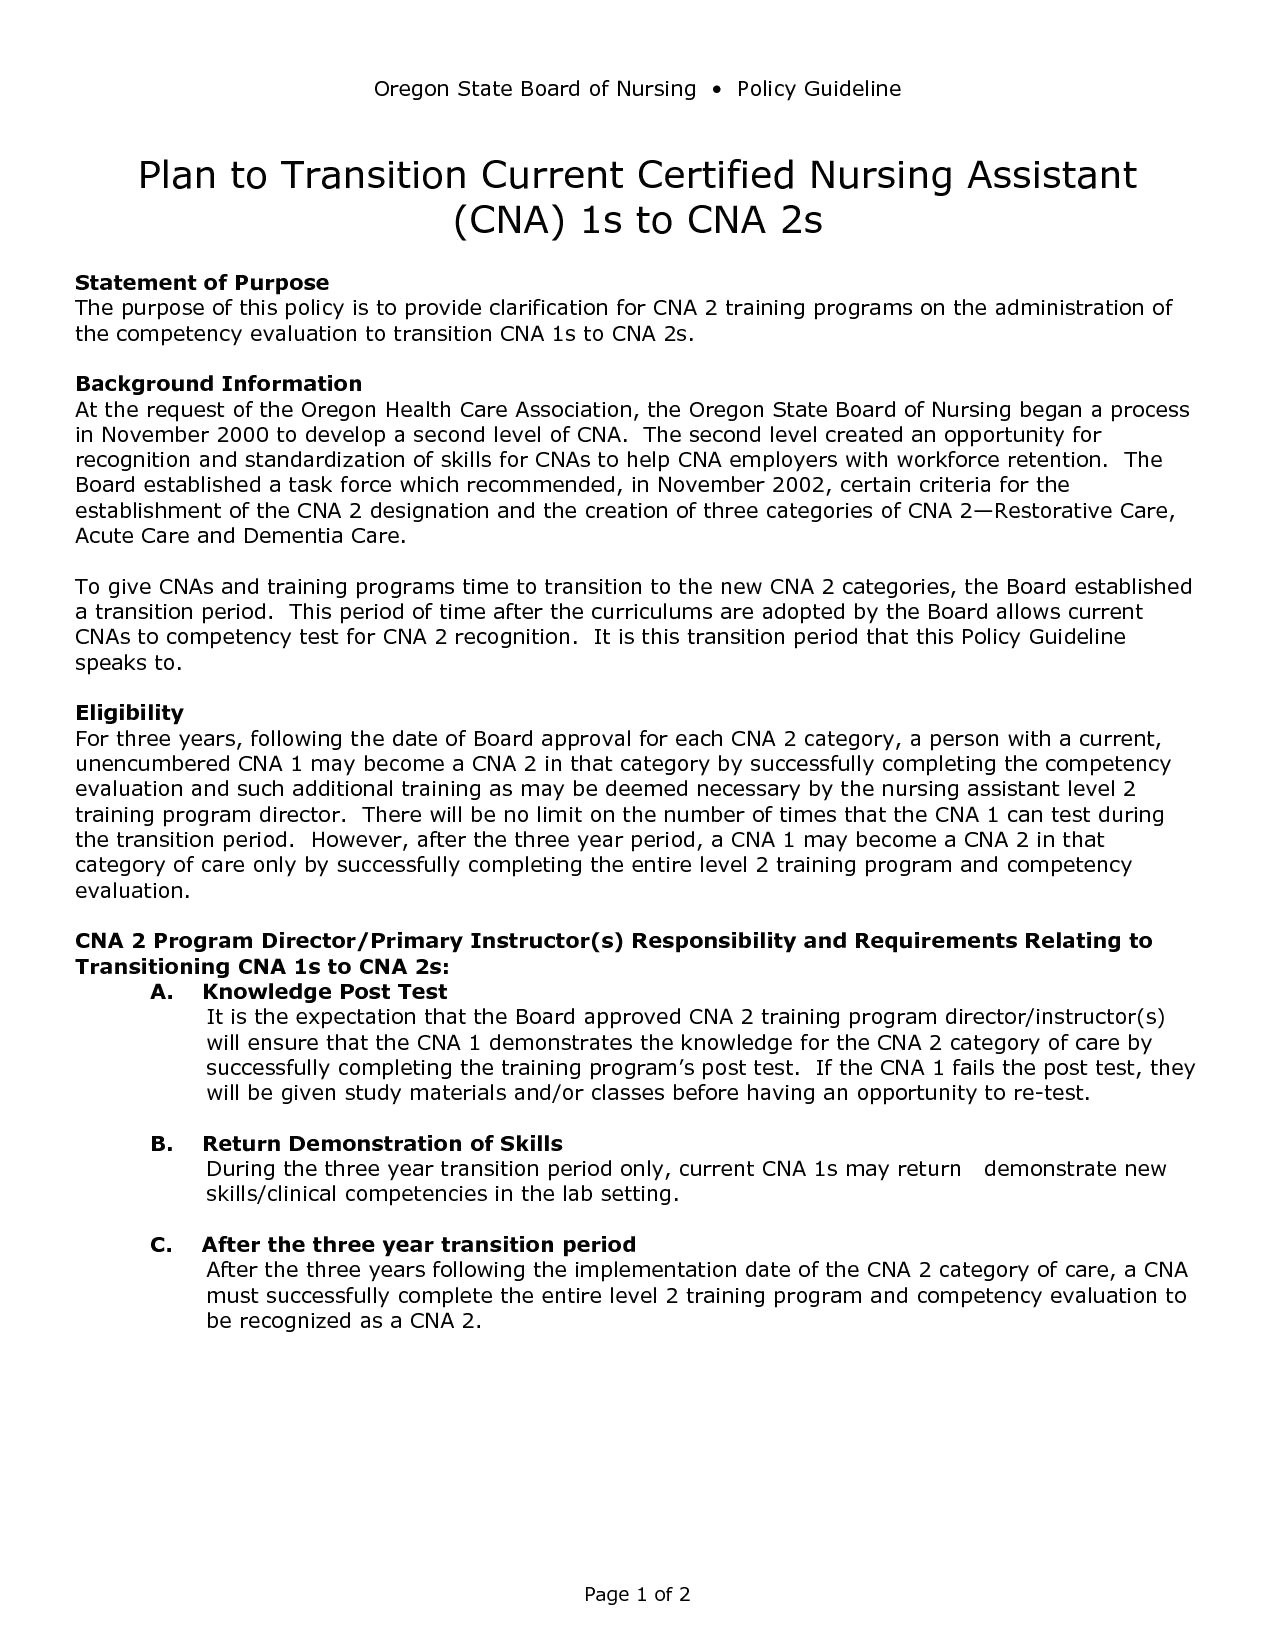 cover letter examples for cna